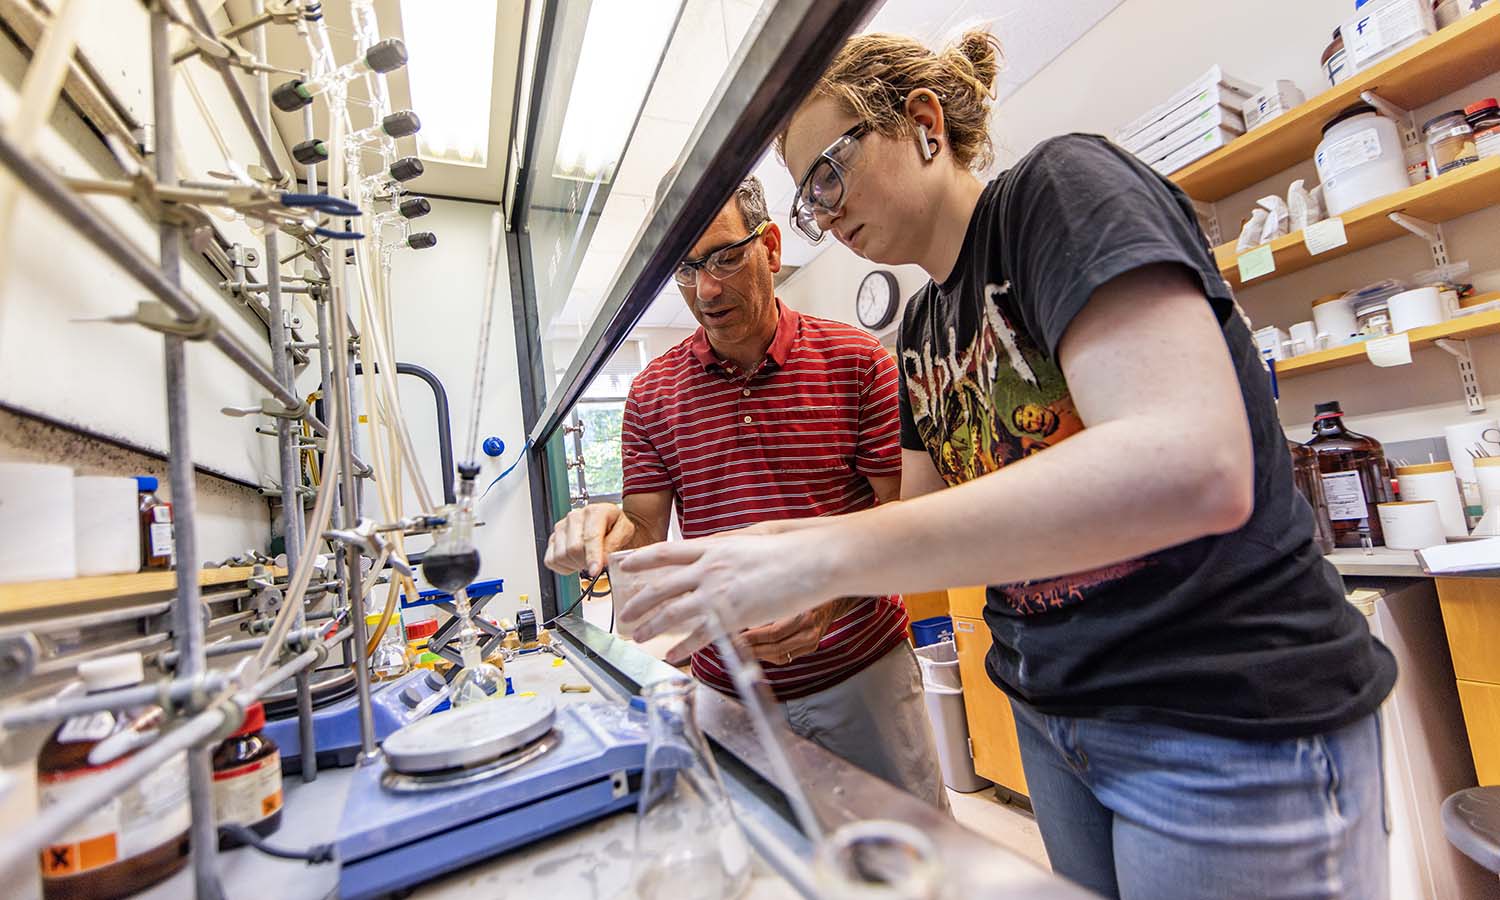 This week, we’re spotlighting students engaged in research with faculty this summer. Here, Aspen Suwyn ’25 works with Professor of Chemistry Justin Miller to synthesize proteins and other molecules with possible pharmaceutical applications.